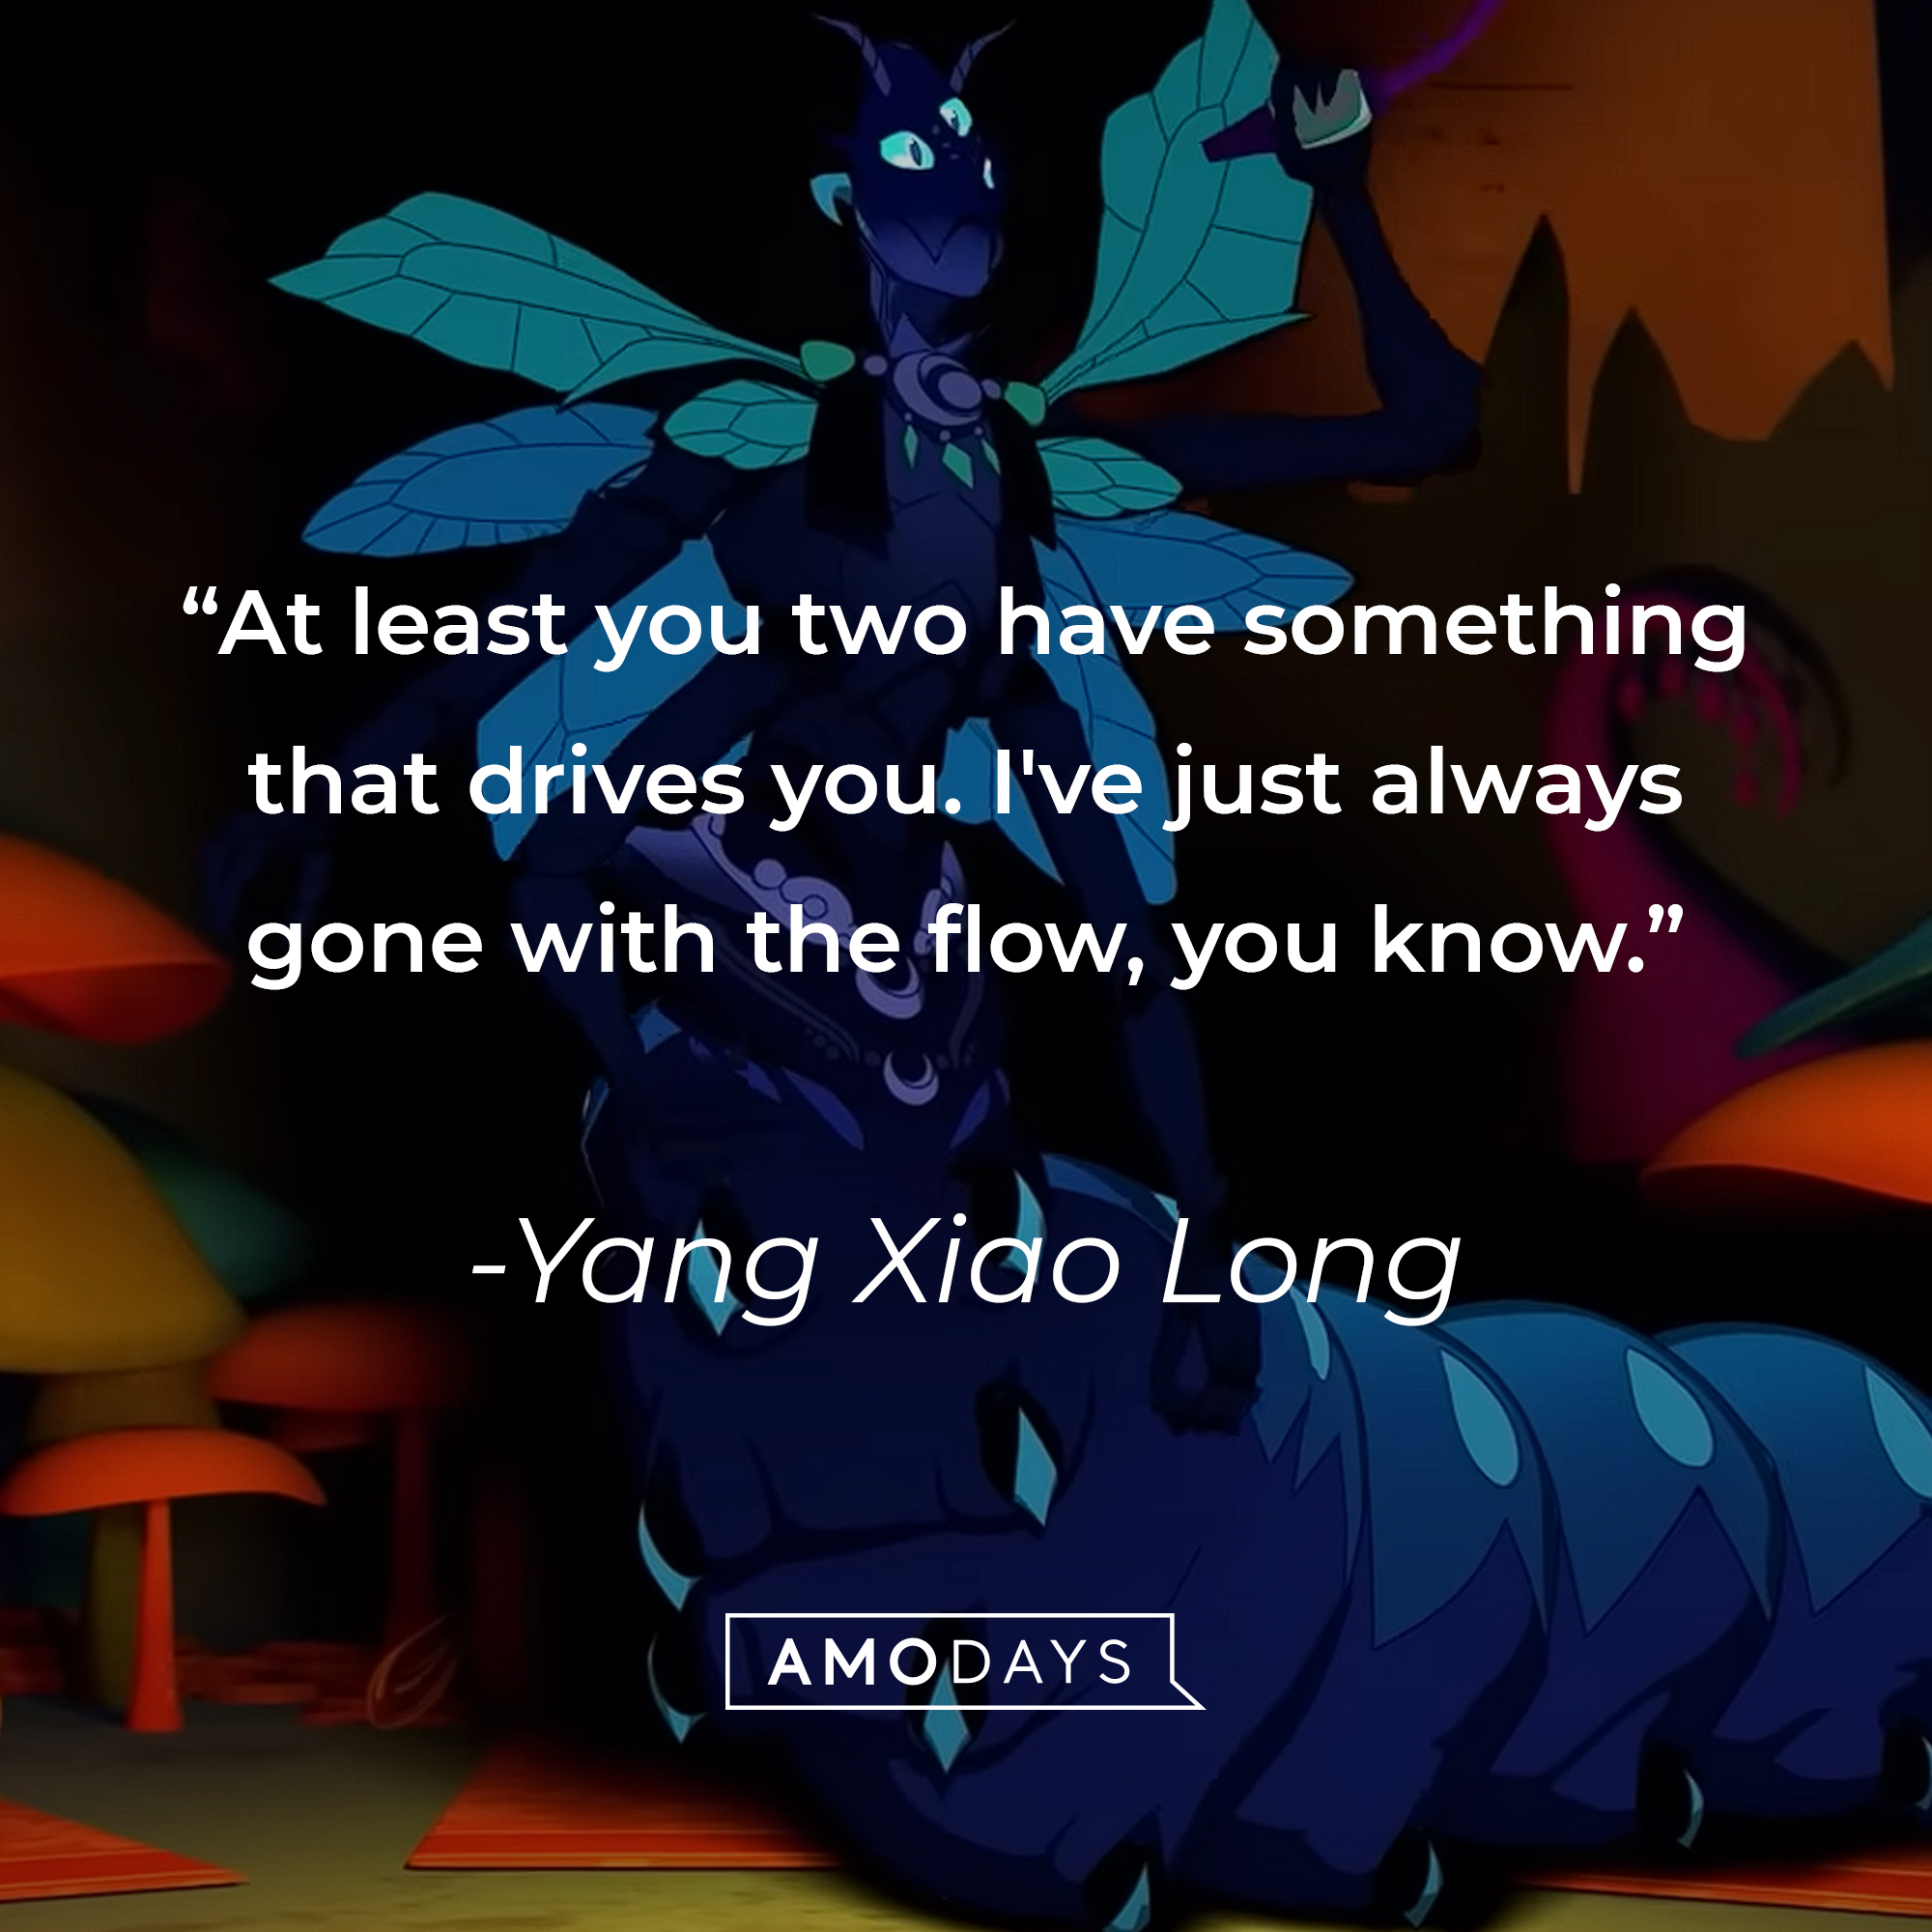 Yang Xiao Long's quote: "At least you two have something that drives you. I've just always gone with the flow, you know." | Source: Youtube.com/crunchyrolldubs